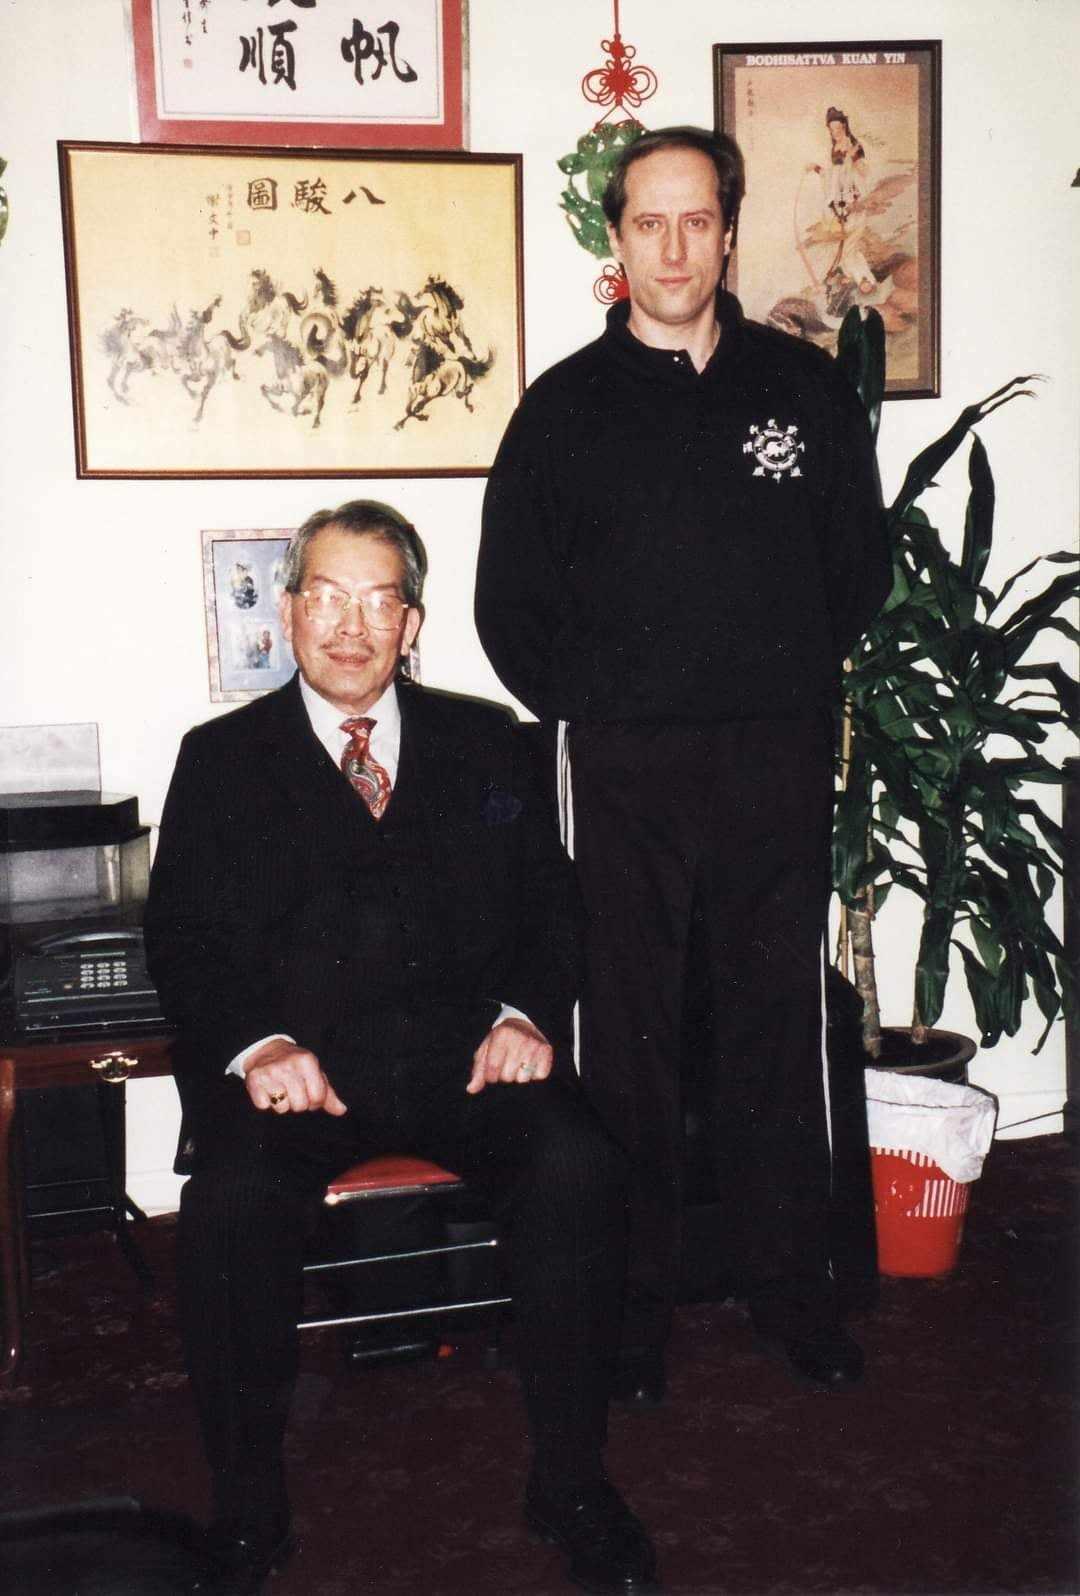 Ronald Galland (L) was photographed in the 1990s with his master Chung Kang Yau (R), who passed away in 1999. (Courtesy of Ronald Galland)